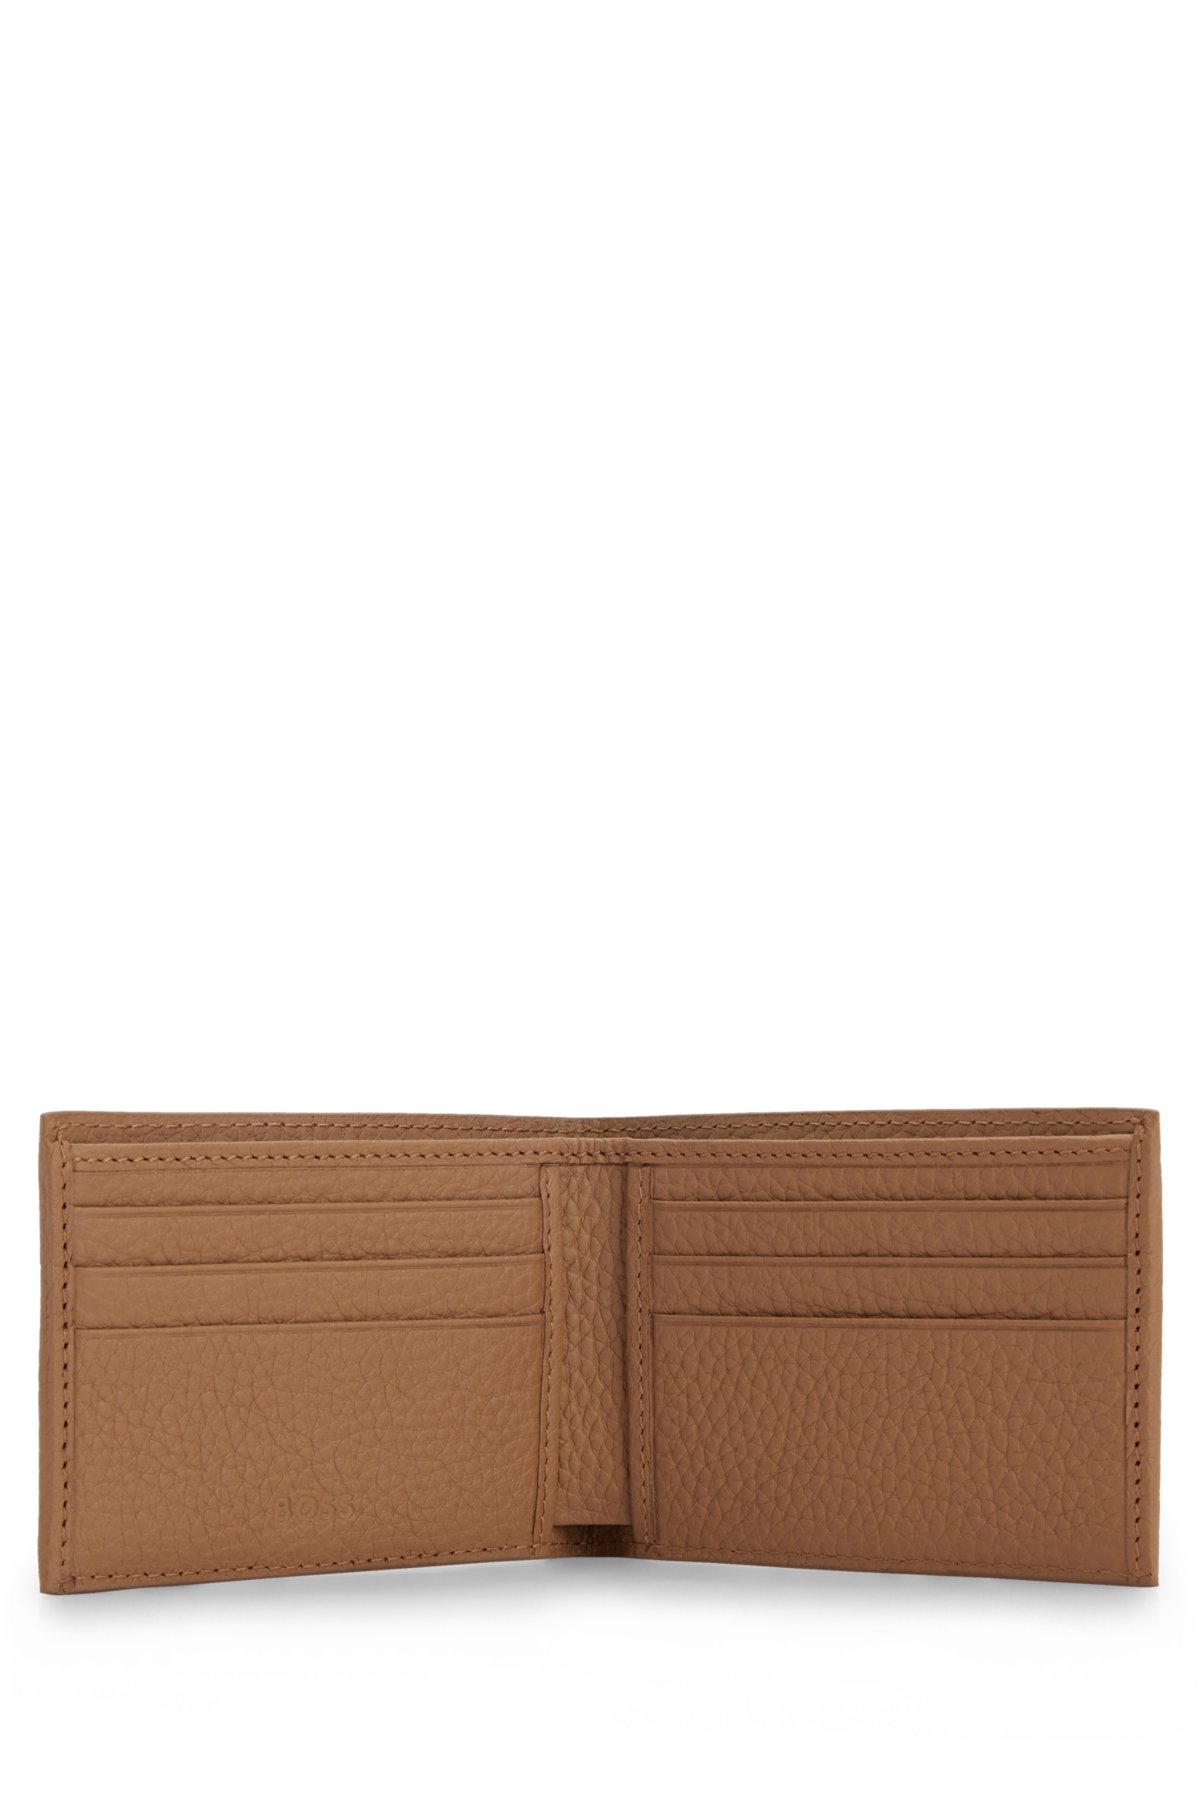 BOSS - Grained-leather wallet with polished logo